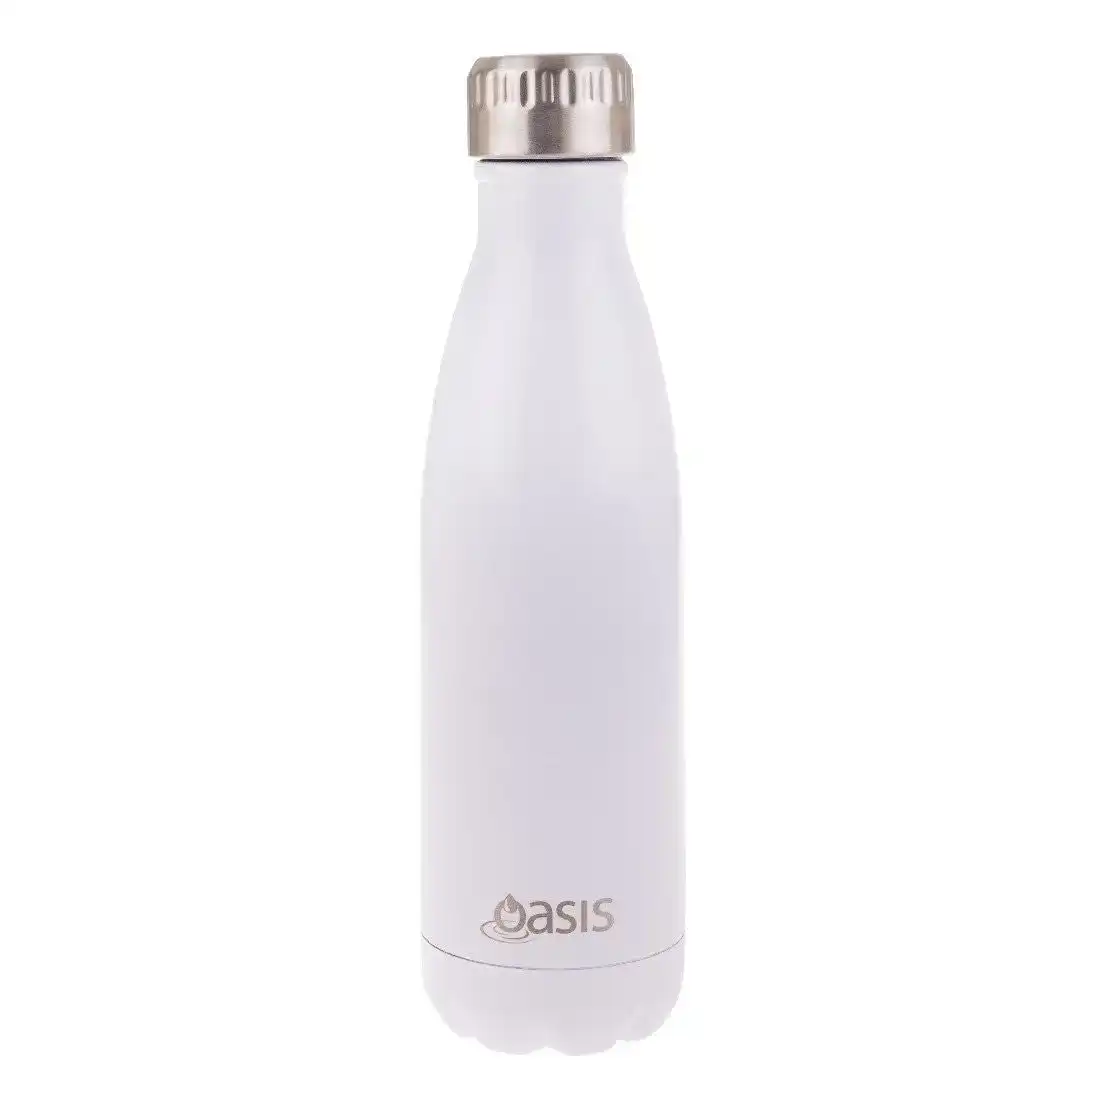 Oasis Insulated Drink Bottle 500ml - Wht